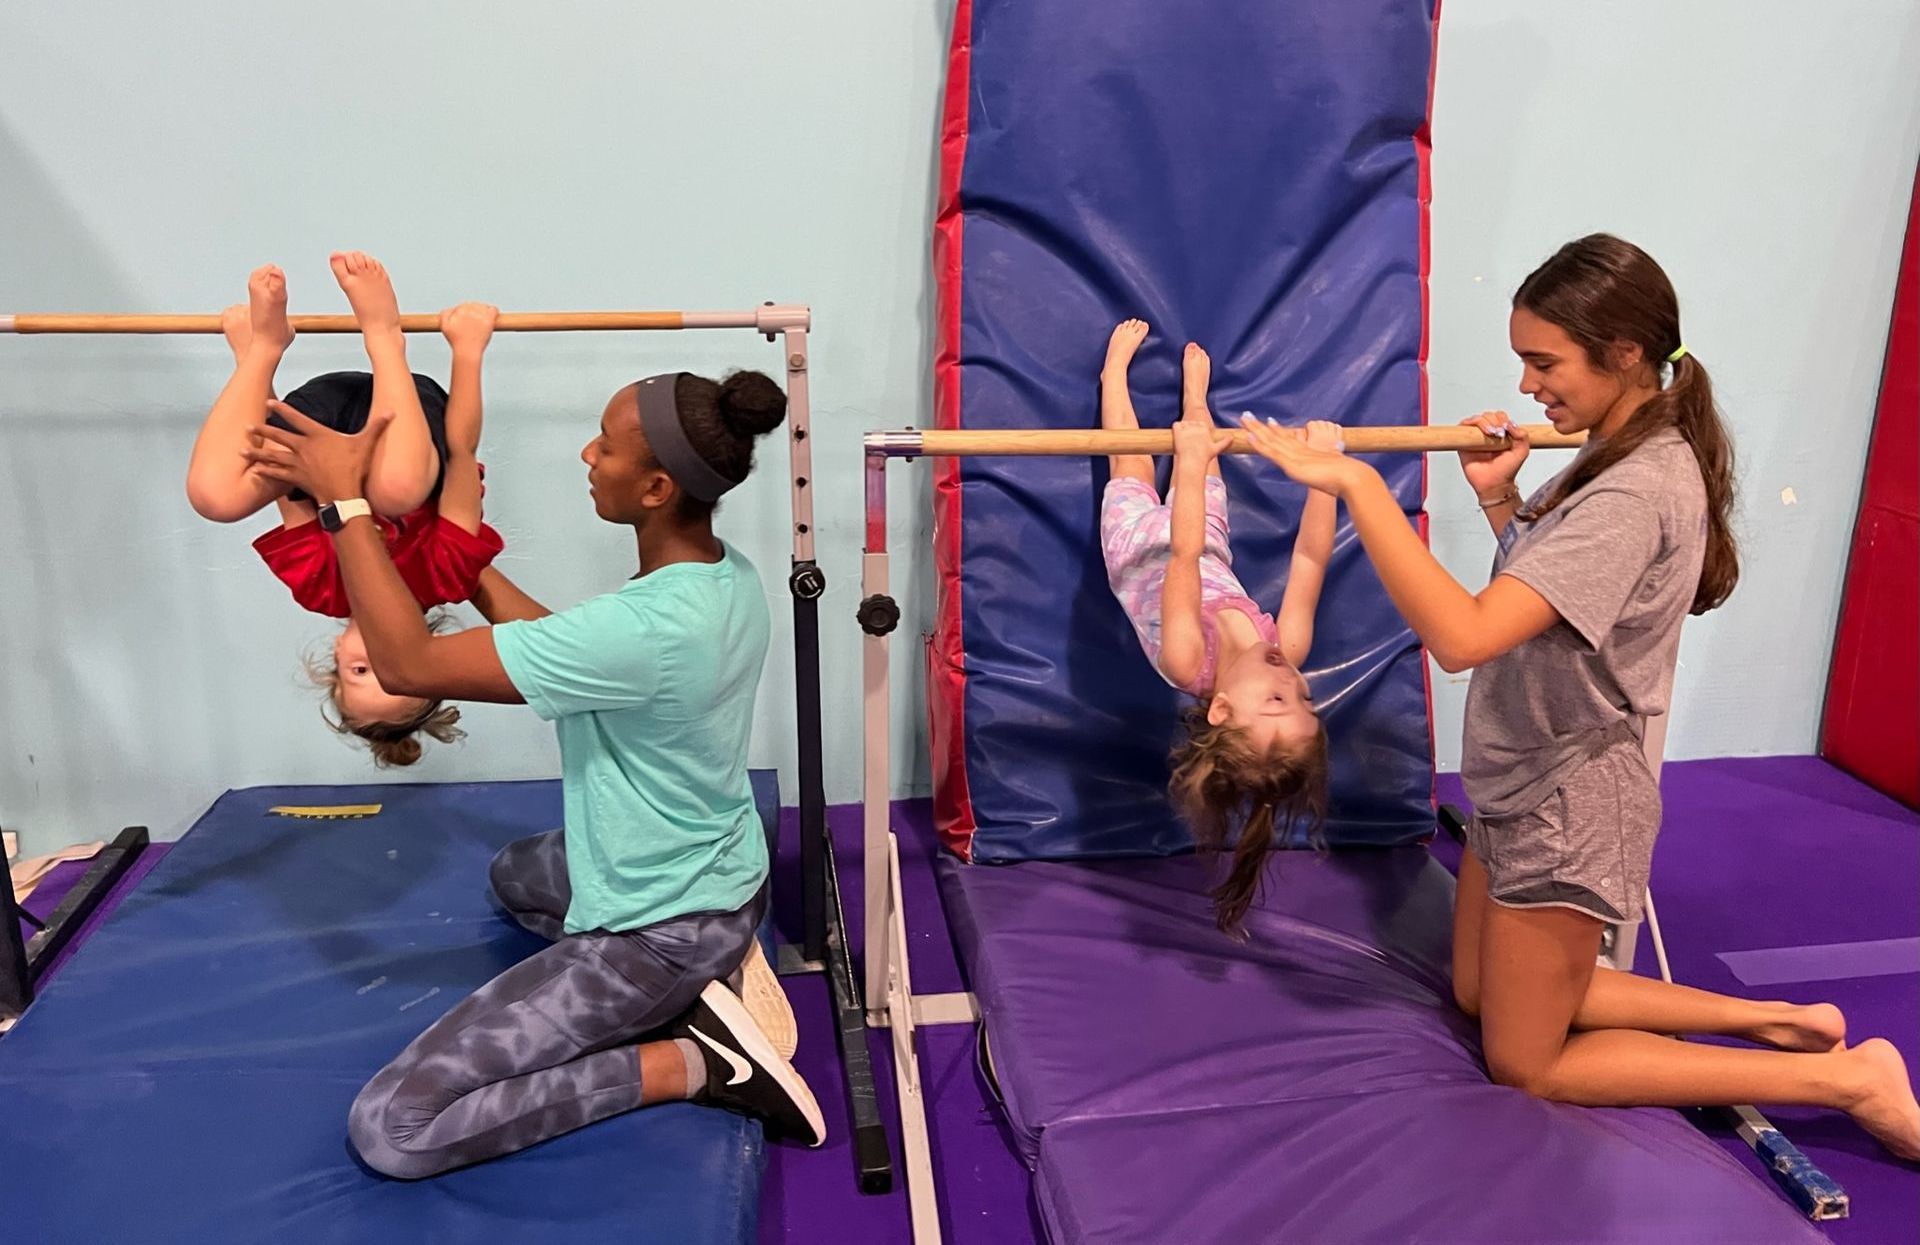 A woman is helping a child do a handstand on a bar in a gym.